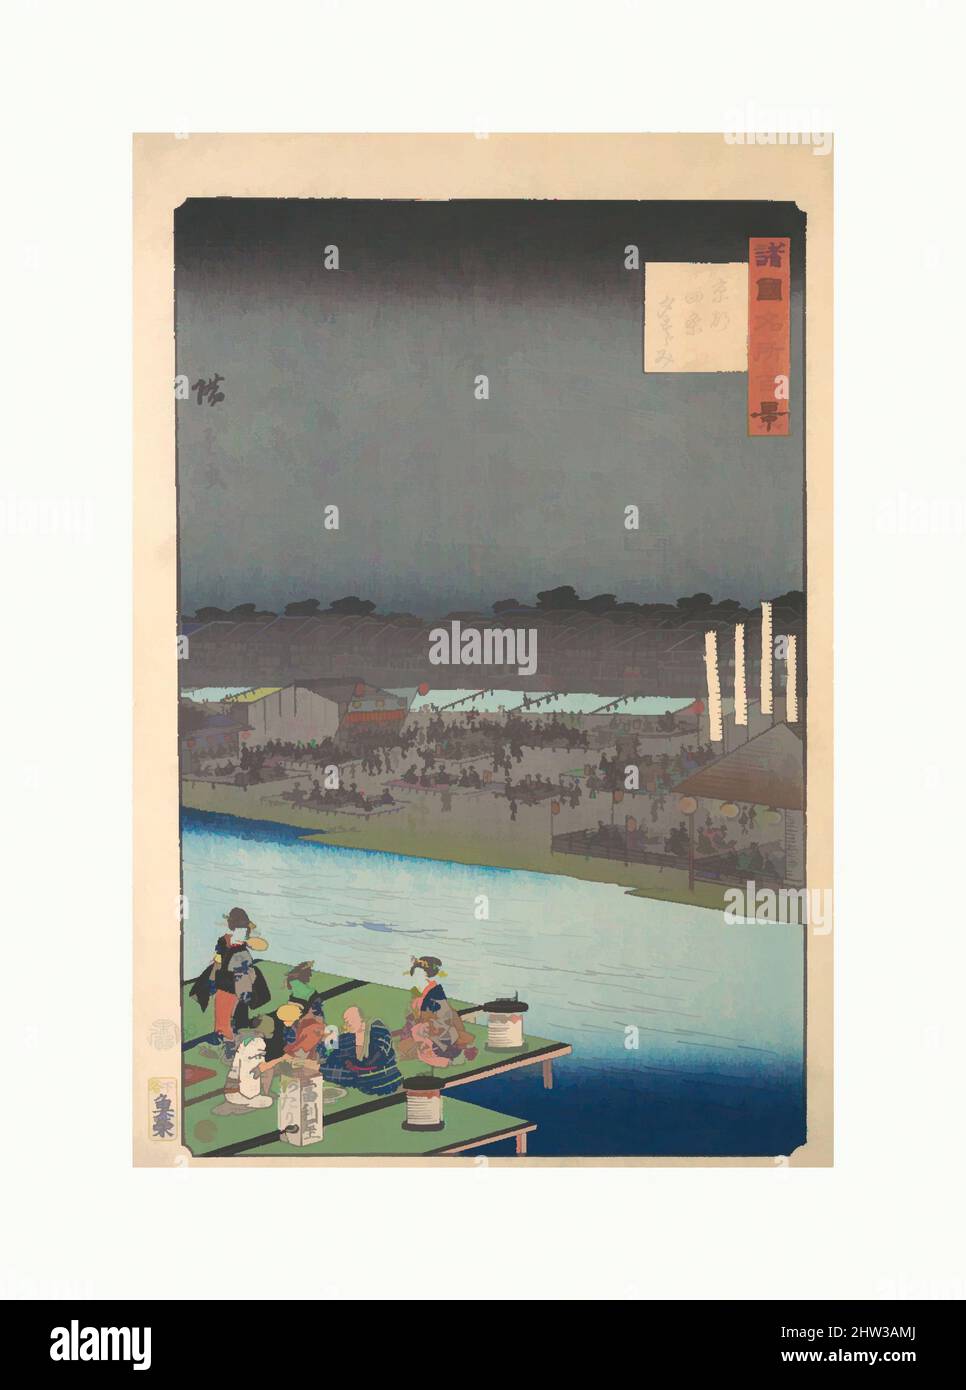 Art inspired by Kyoto Shijo yu-suzumi, Cooling Off at the Kamo River near Shijo in Kyoto, Edo period (1615–1868), ca. 1860, Japan, Polychrome woodblock print; ink and color on paper, H. 14 5/8 in. (37.1 cm); W. 9 7/8 in. (25.1 cm), Prints, Utagawa Hiroshige II (Japanese, 1829–1869, Classic works modernized by Artotop with a splash of modernity. Shapes, color and value, eye-catching visual impact on art. Emotions through freedom of artworks in a contemporary way. A timeless message pursuing a wildly creative new direction. Artists turning to the digital medium and creating the Artotop NFT Stock Photo